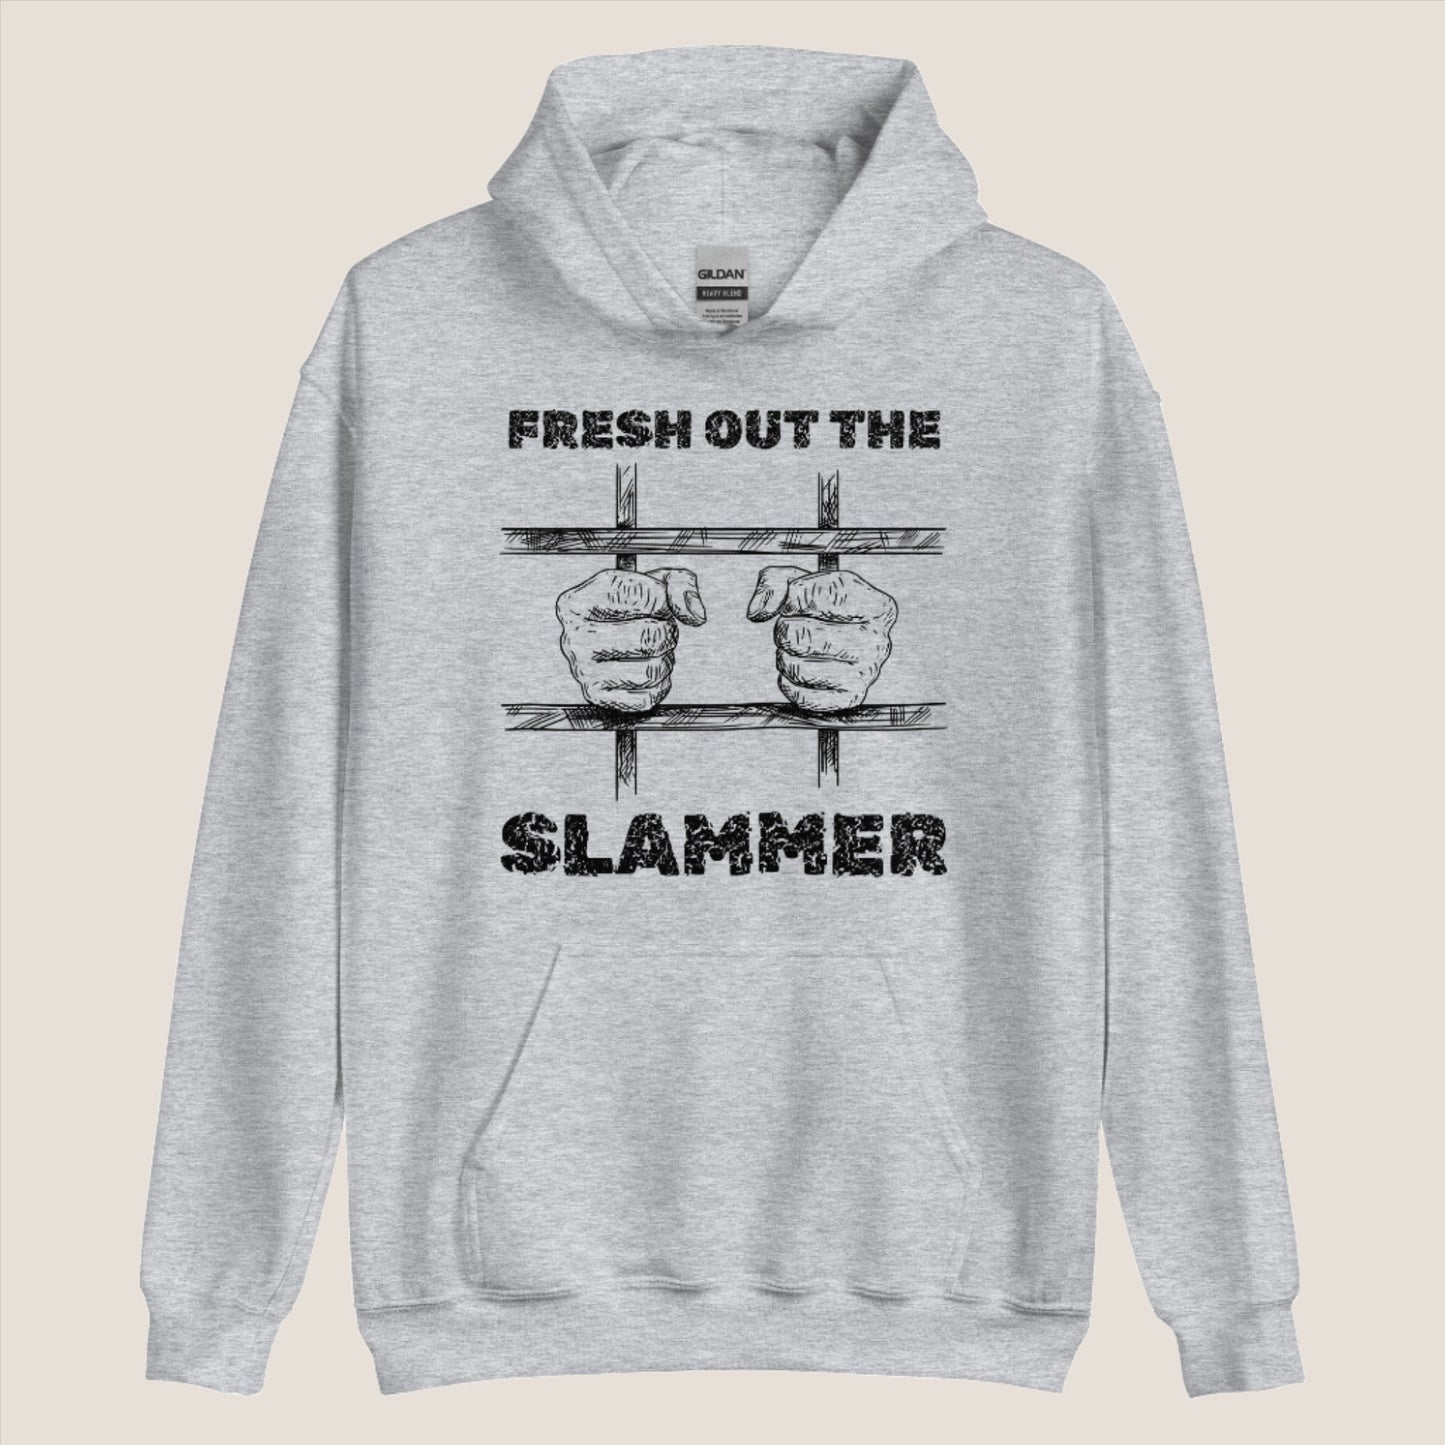 "Fresh out the Slammer" Taylor Swift inspired Unisex Hoodie // Delysia Designs